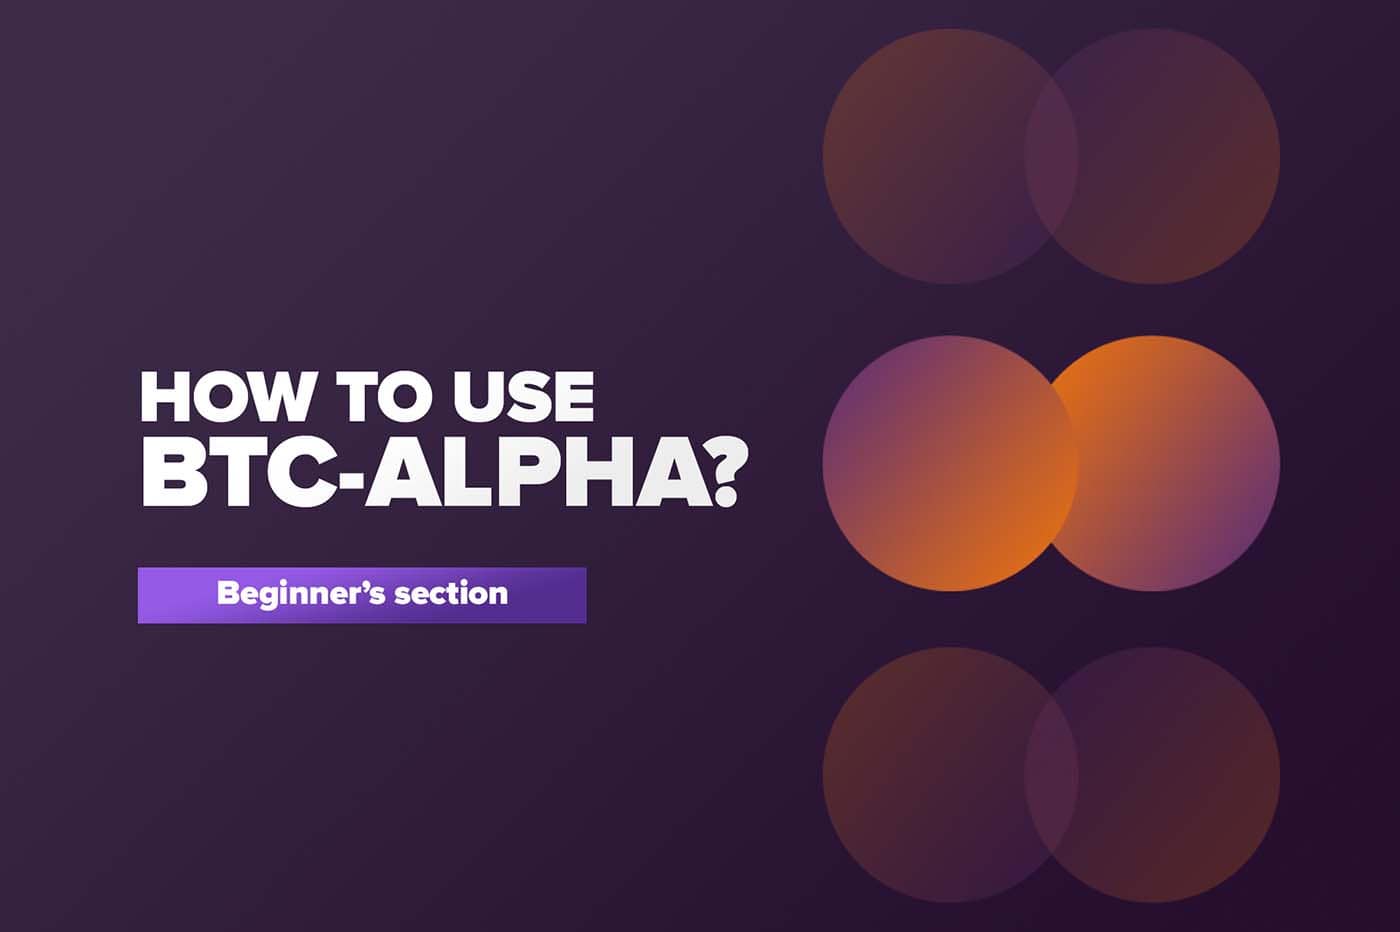 Article How to use BTC-ALPHA?